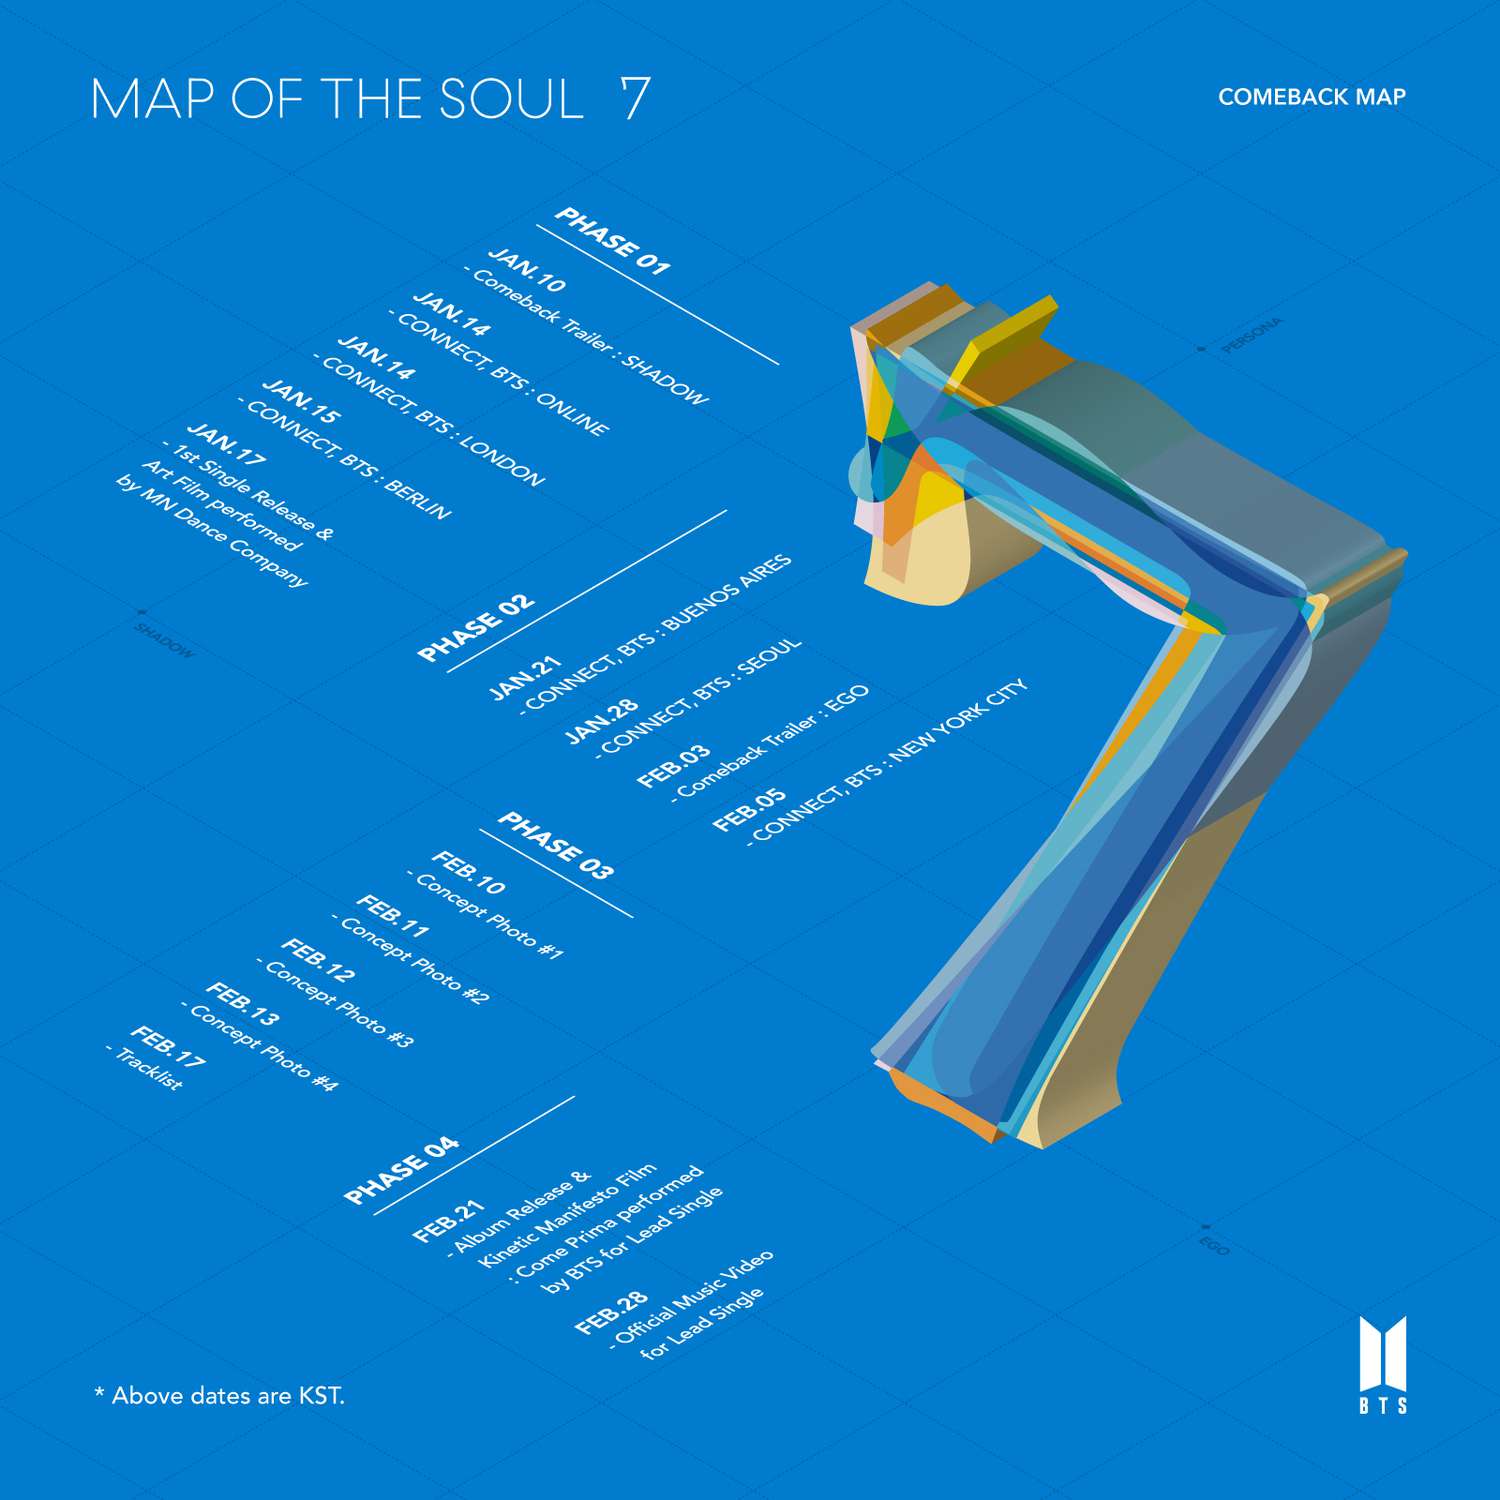 Bts Release New Album Map Of The Soul 7 Featuring Lead Single On